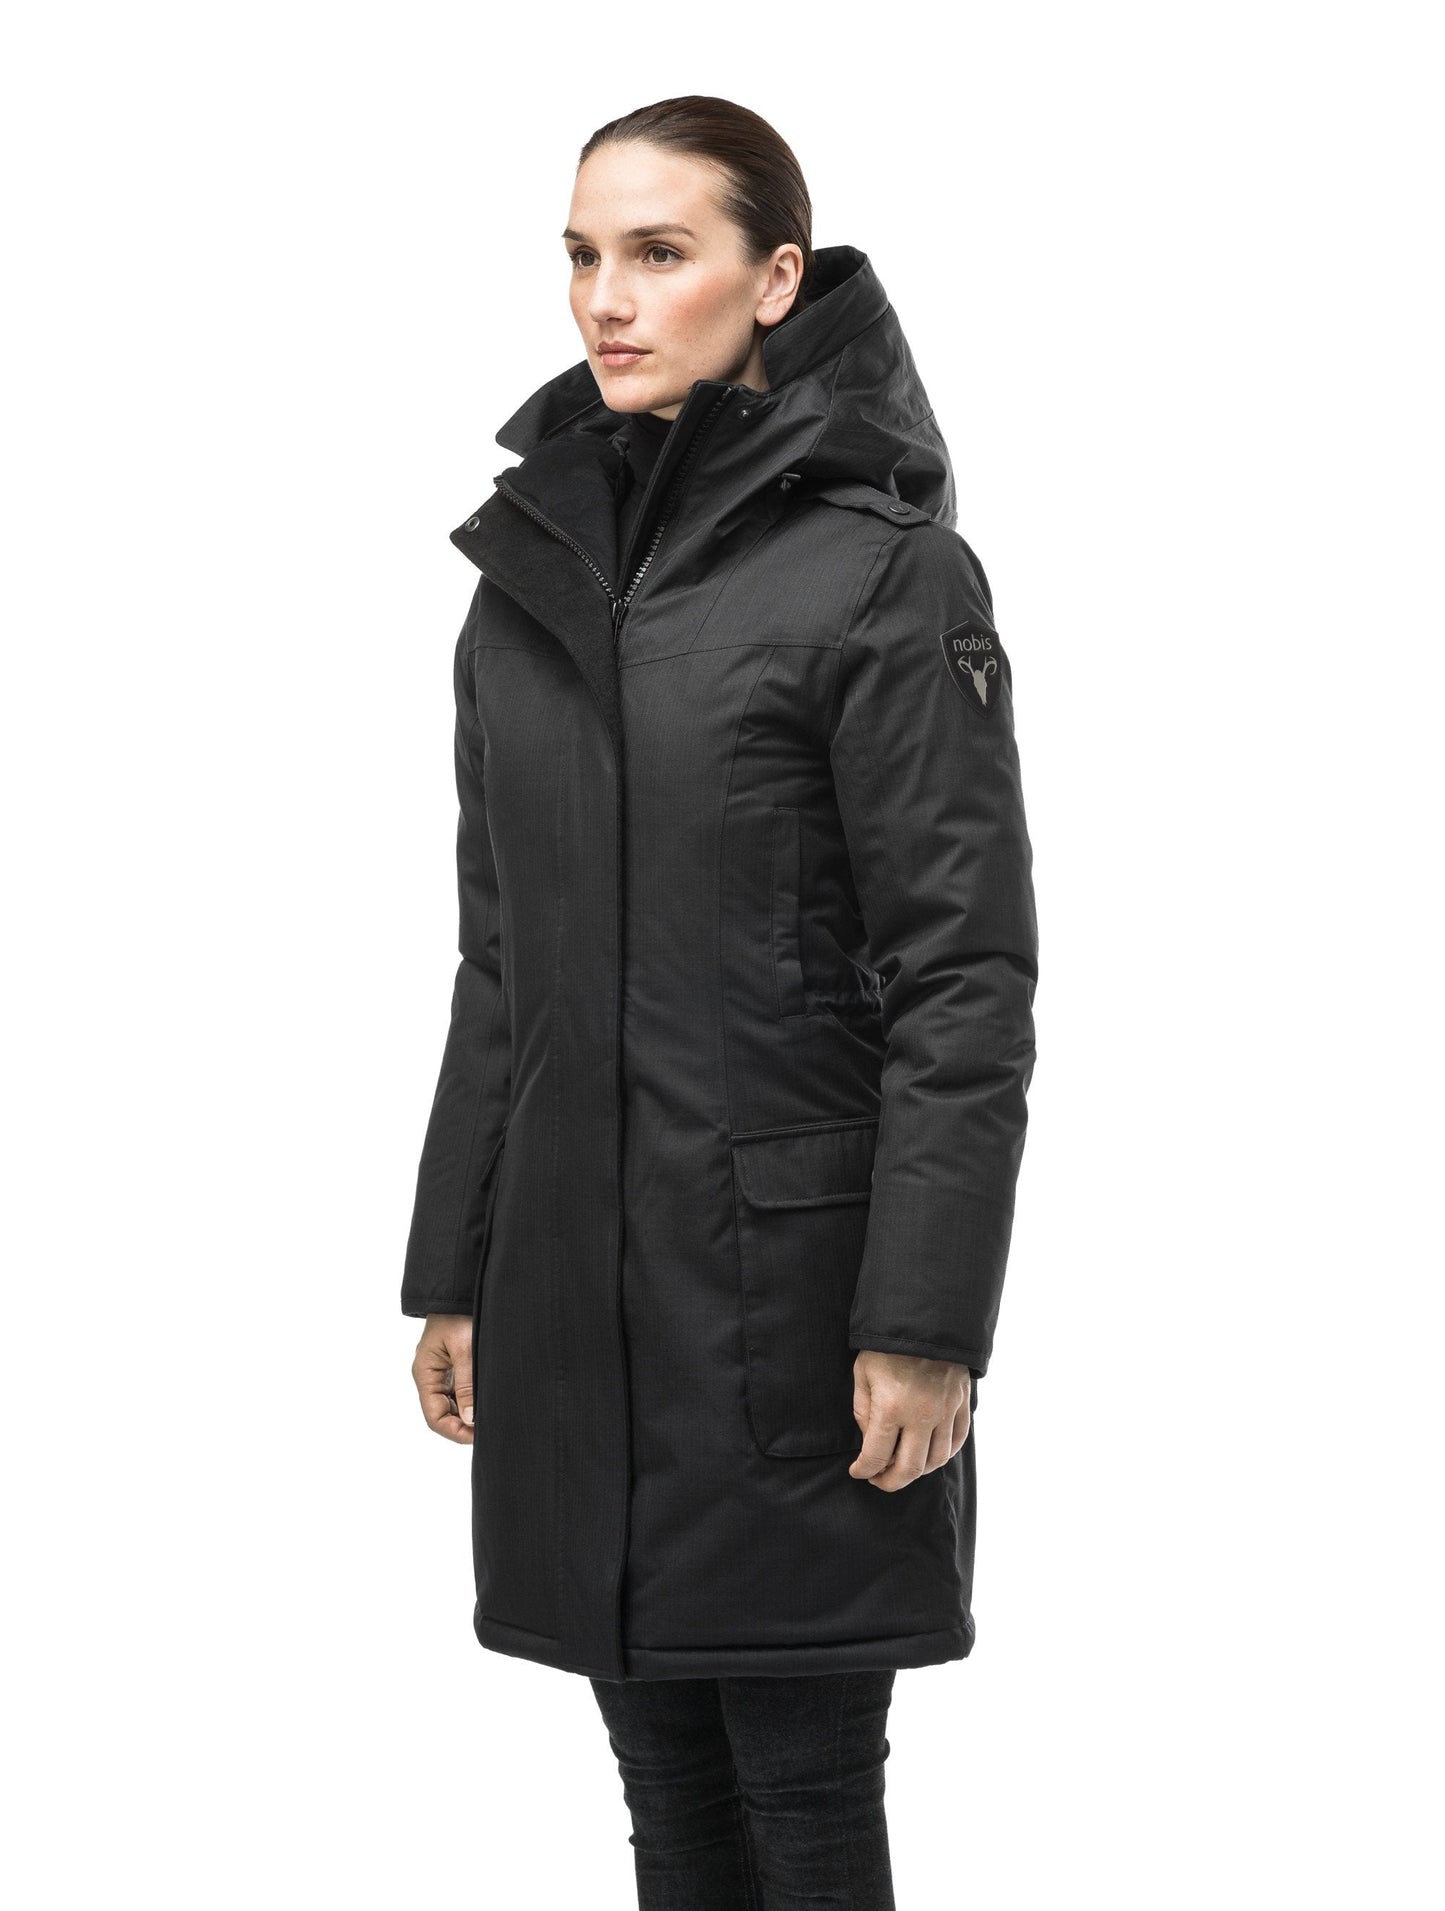 Women's knee length down filled parka with fur trim hood in CH Black